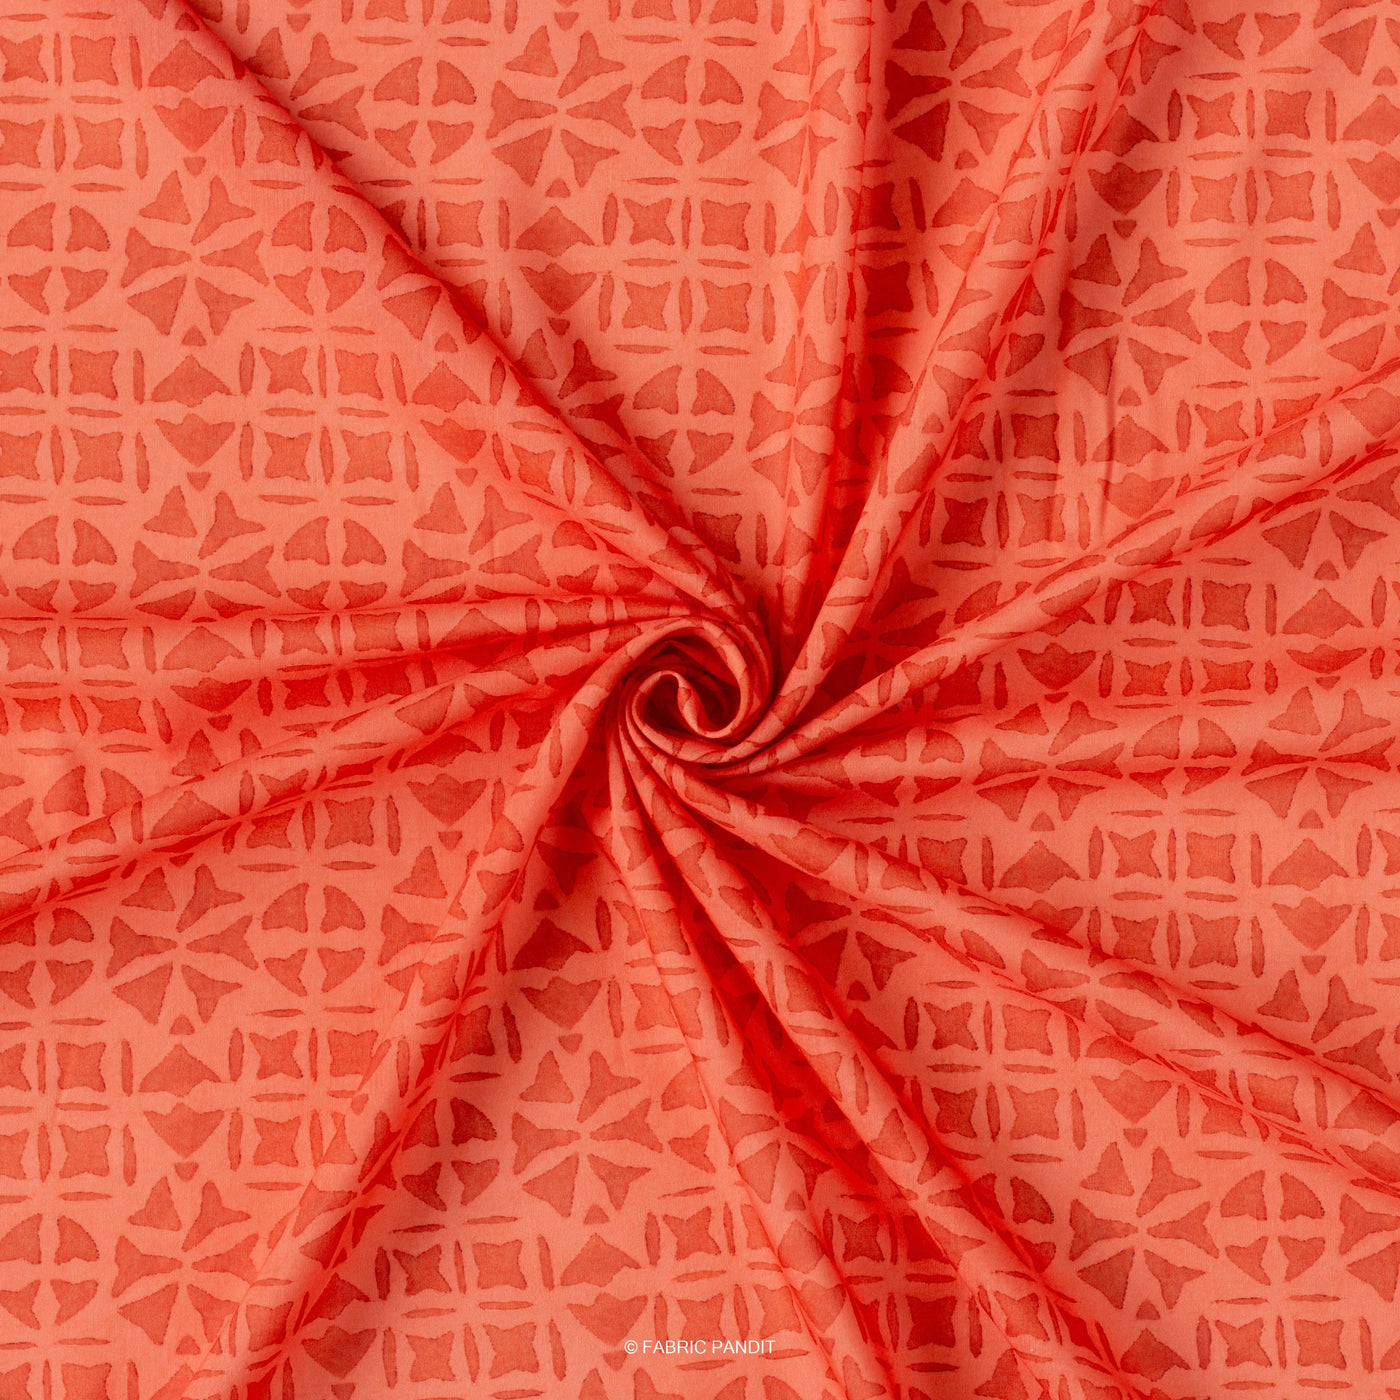 Digital Printed Muslin Fabric Cut Piece (CUT PIECE) Salmon Red Squares And Circles Geometric Applique Pattern Digital Printed Muslin Fabric (Width 44 Inches)